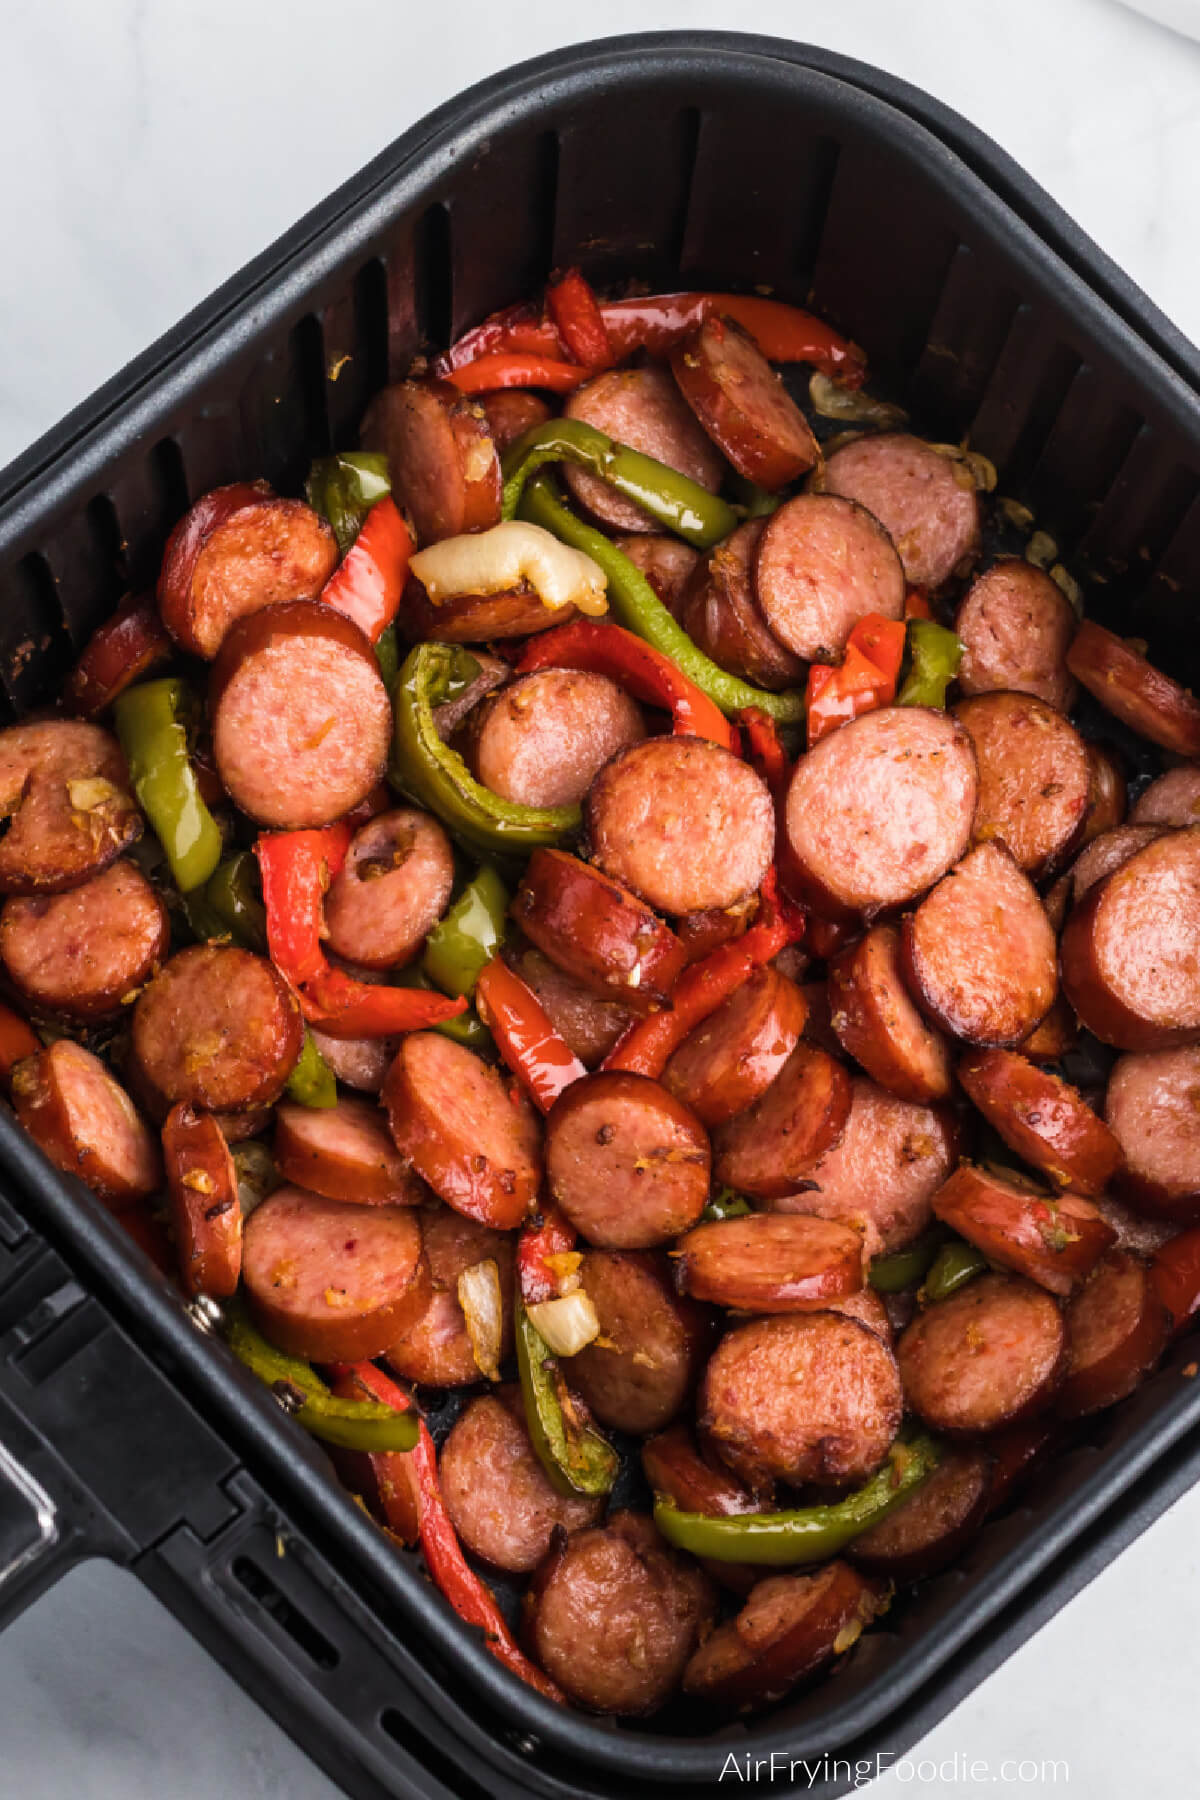 Seasoned sausage and peppers in air fryer basket, ready to serve.